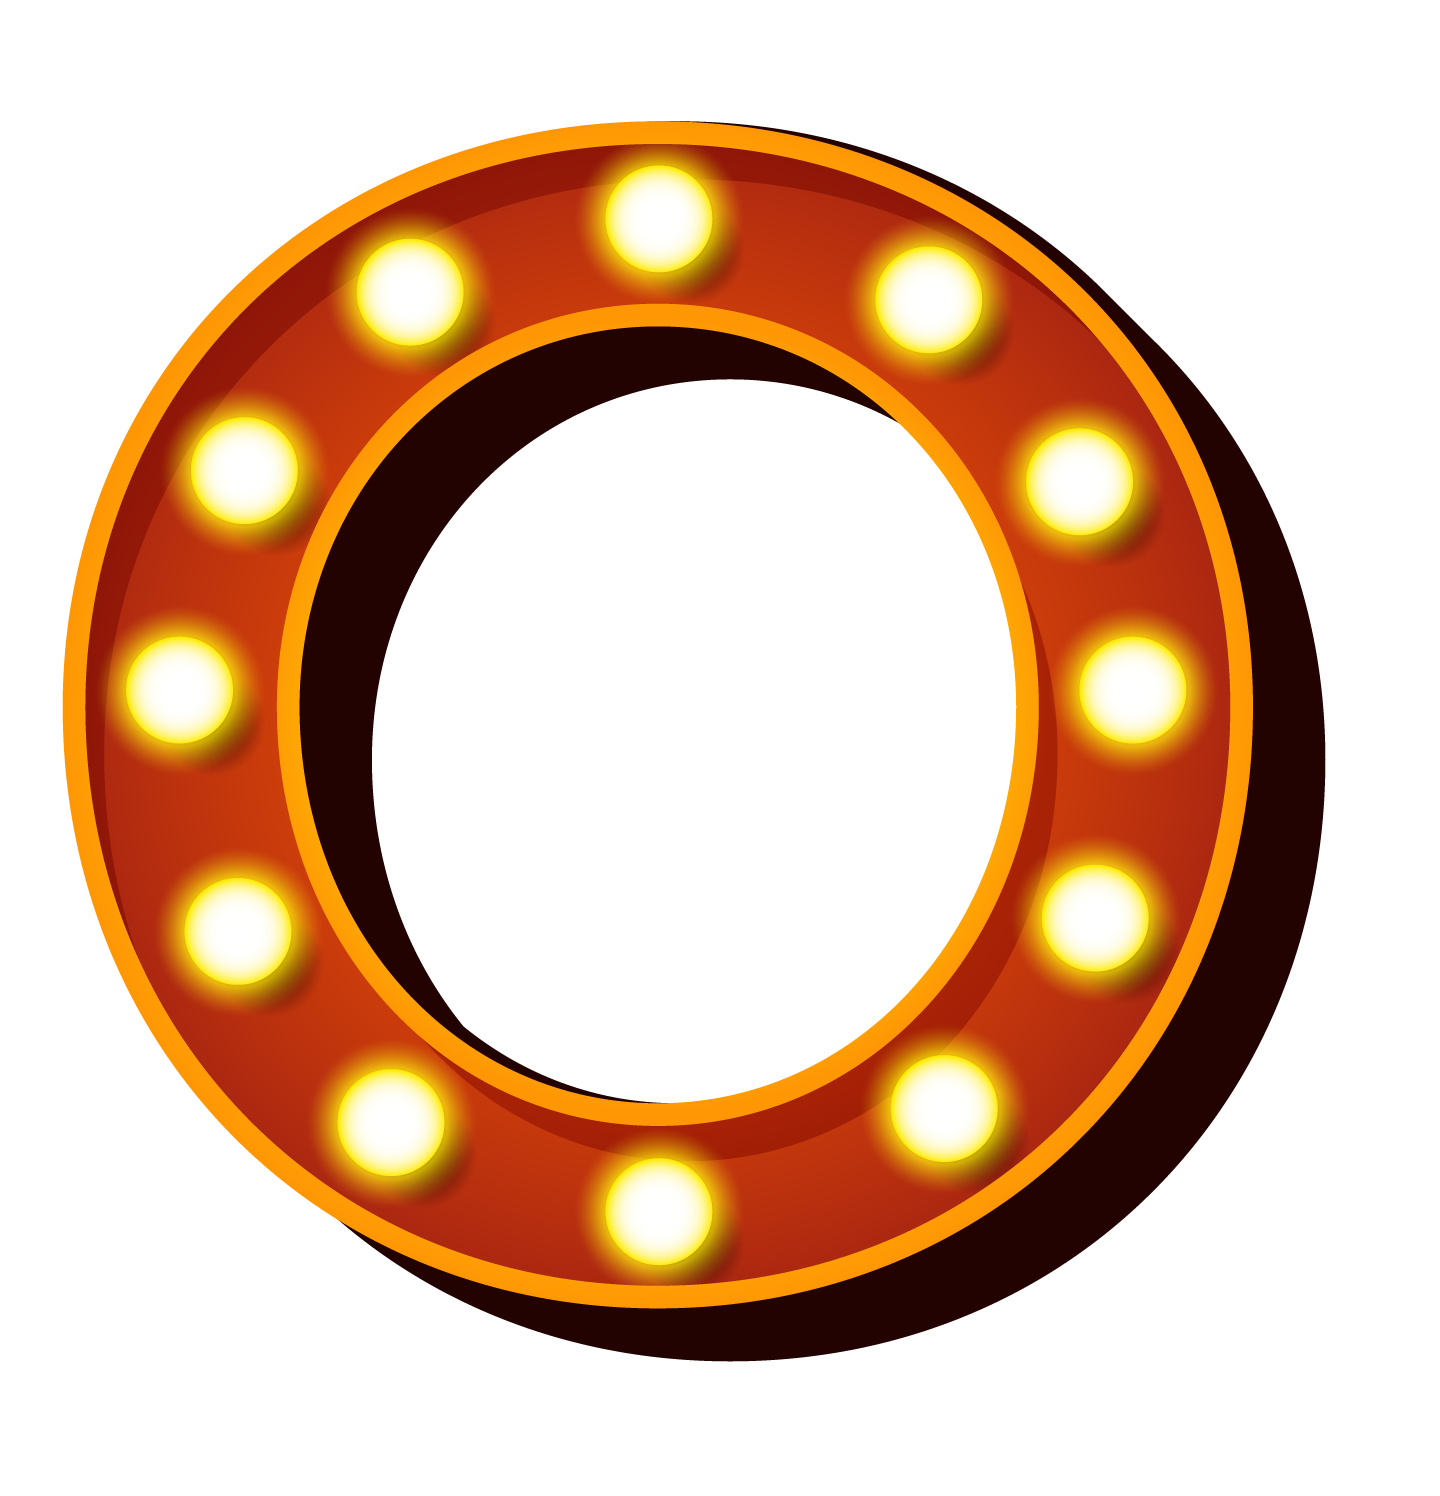 Letter O PNG Images Transparent Background | PNG Play